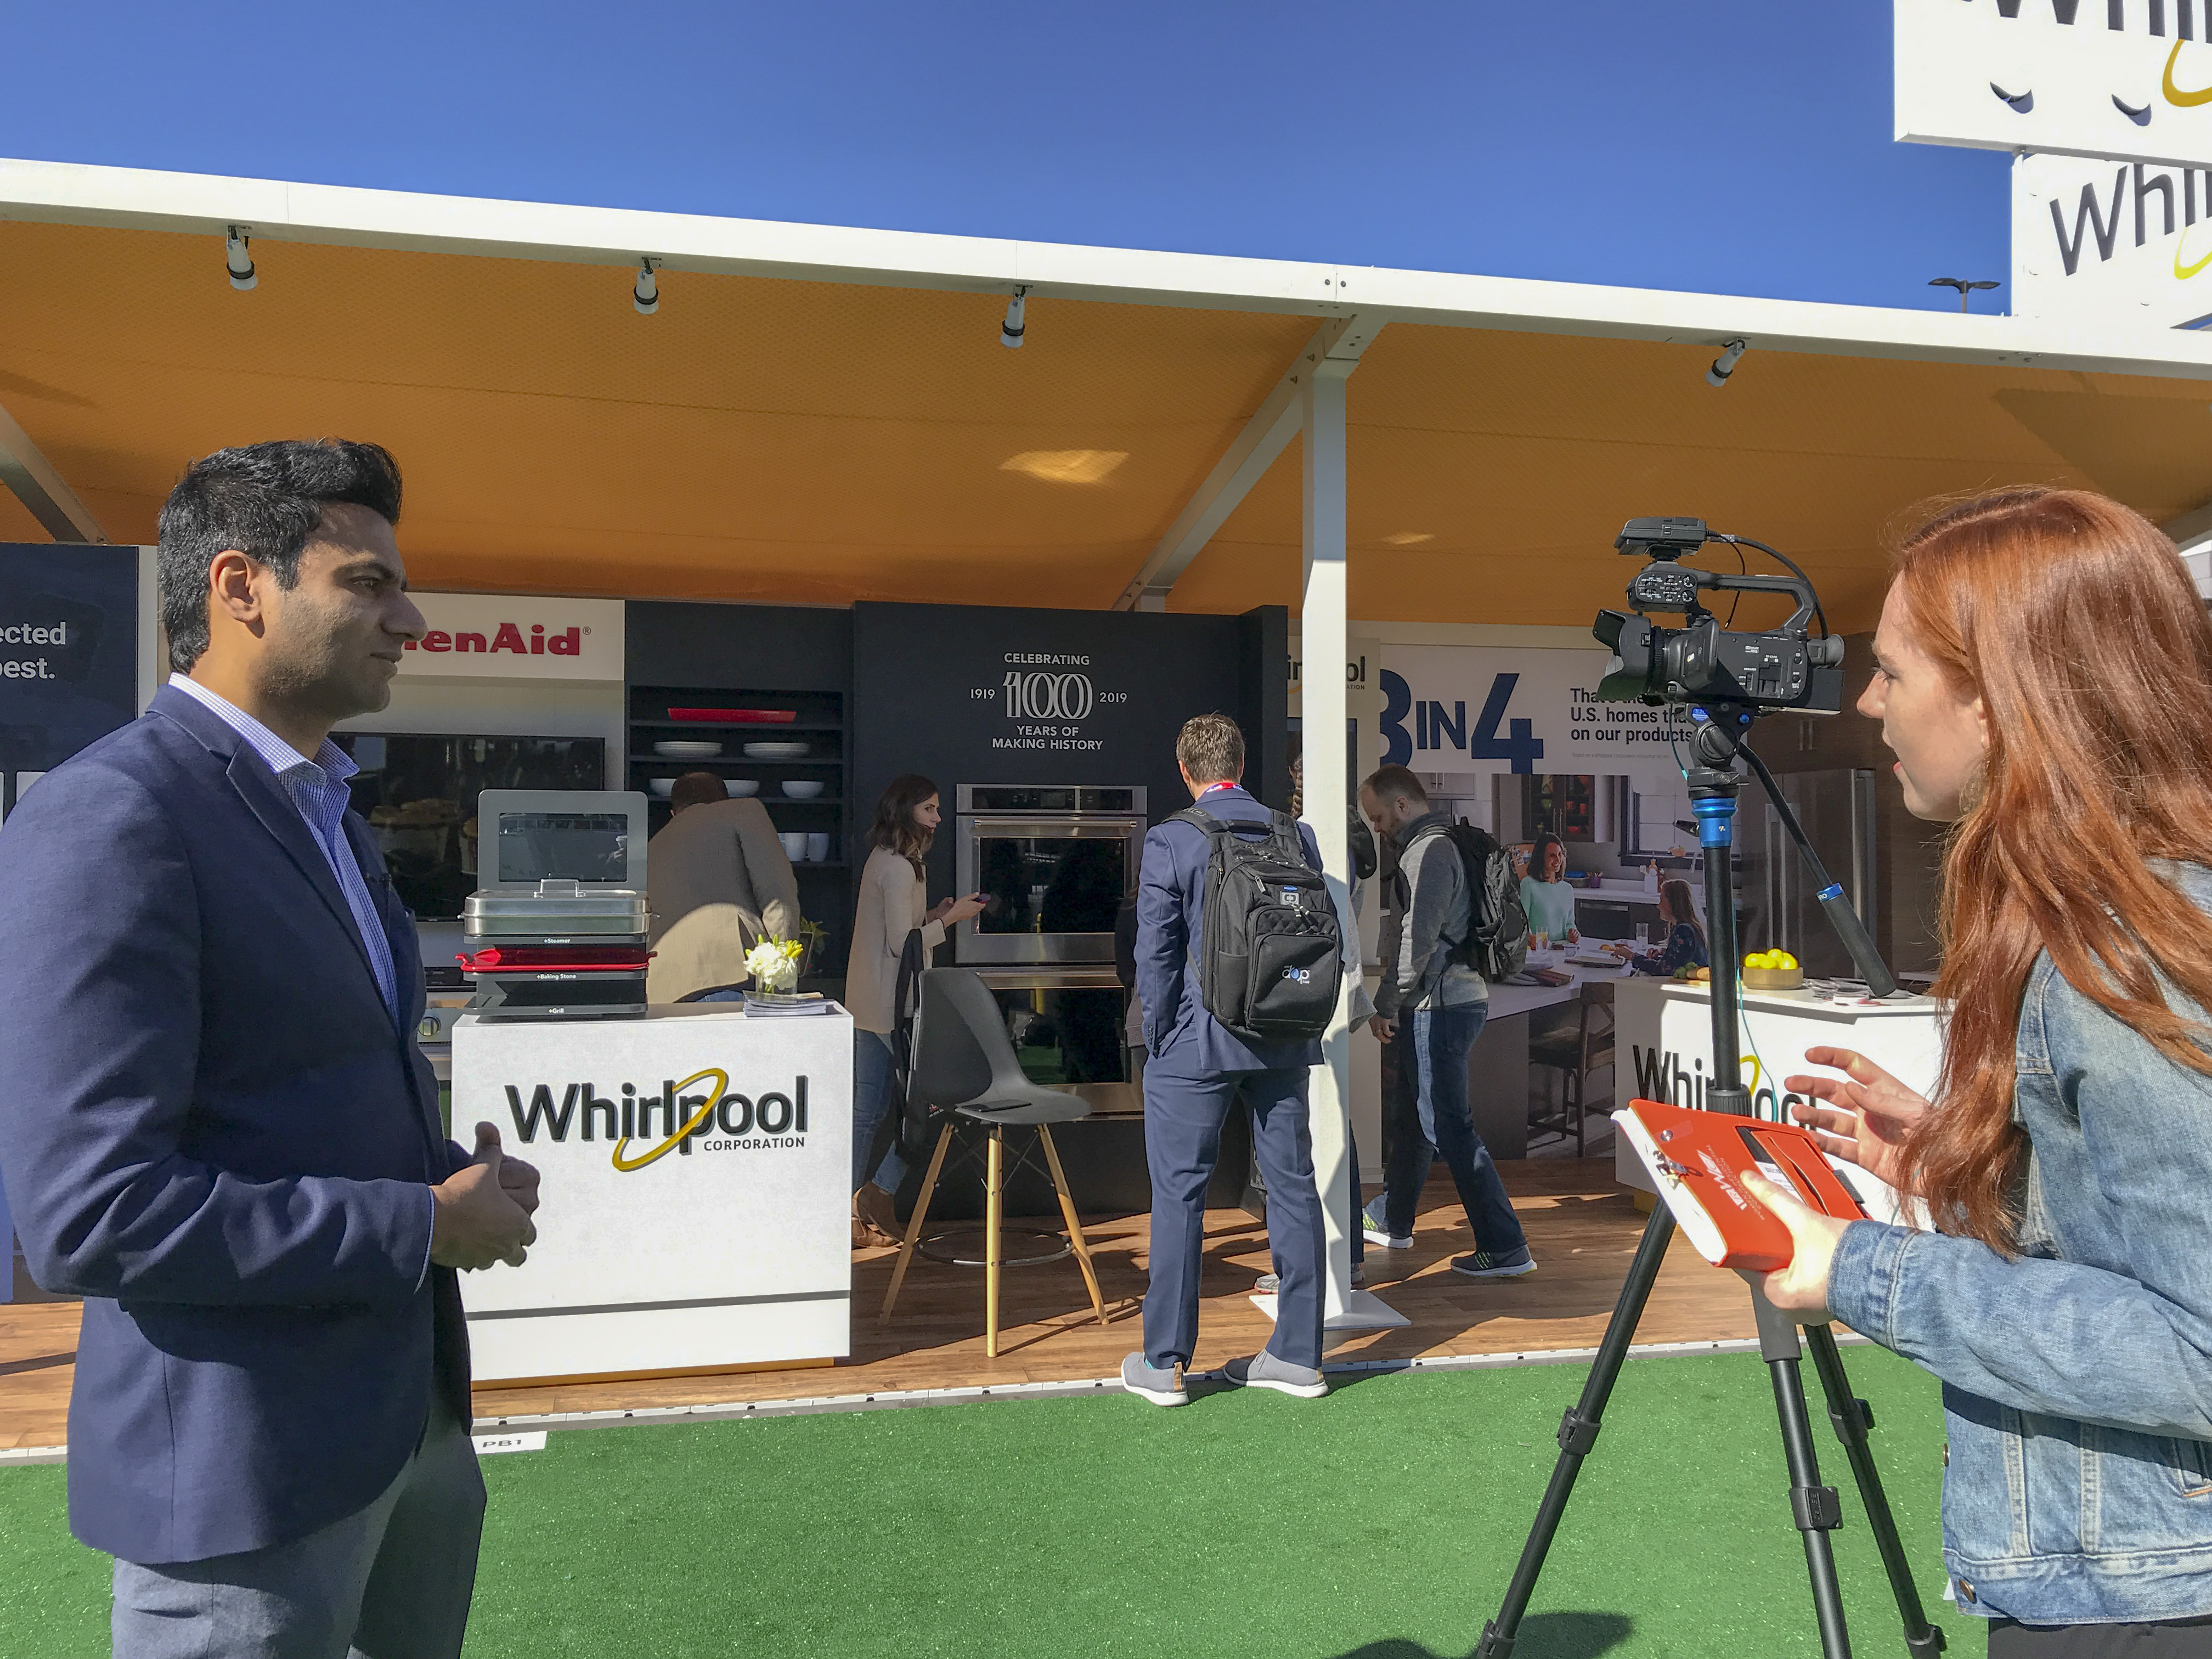 Whirlpool Corporation representative Jason Mathew participates in a media interview during a trade show.